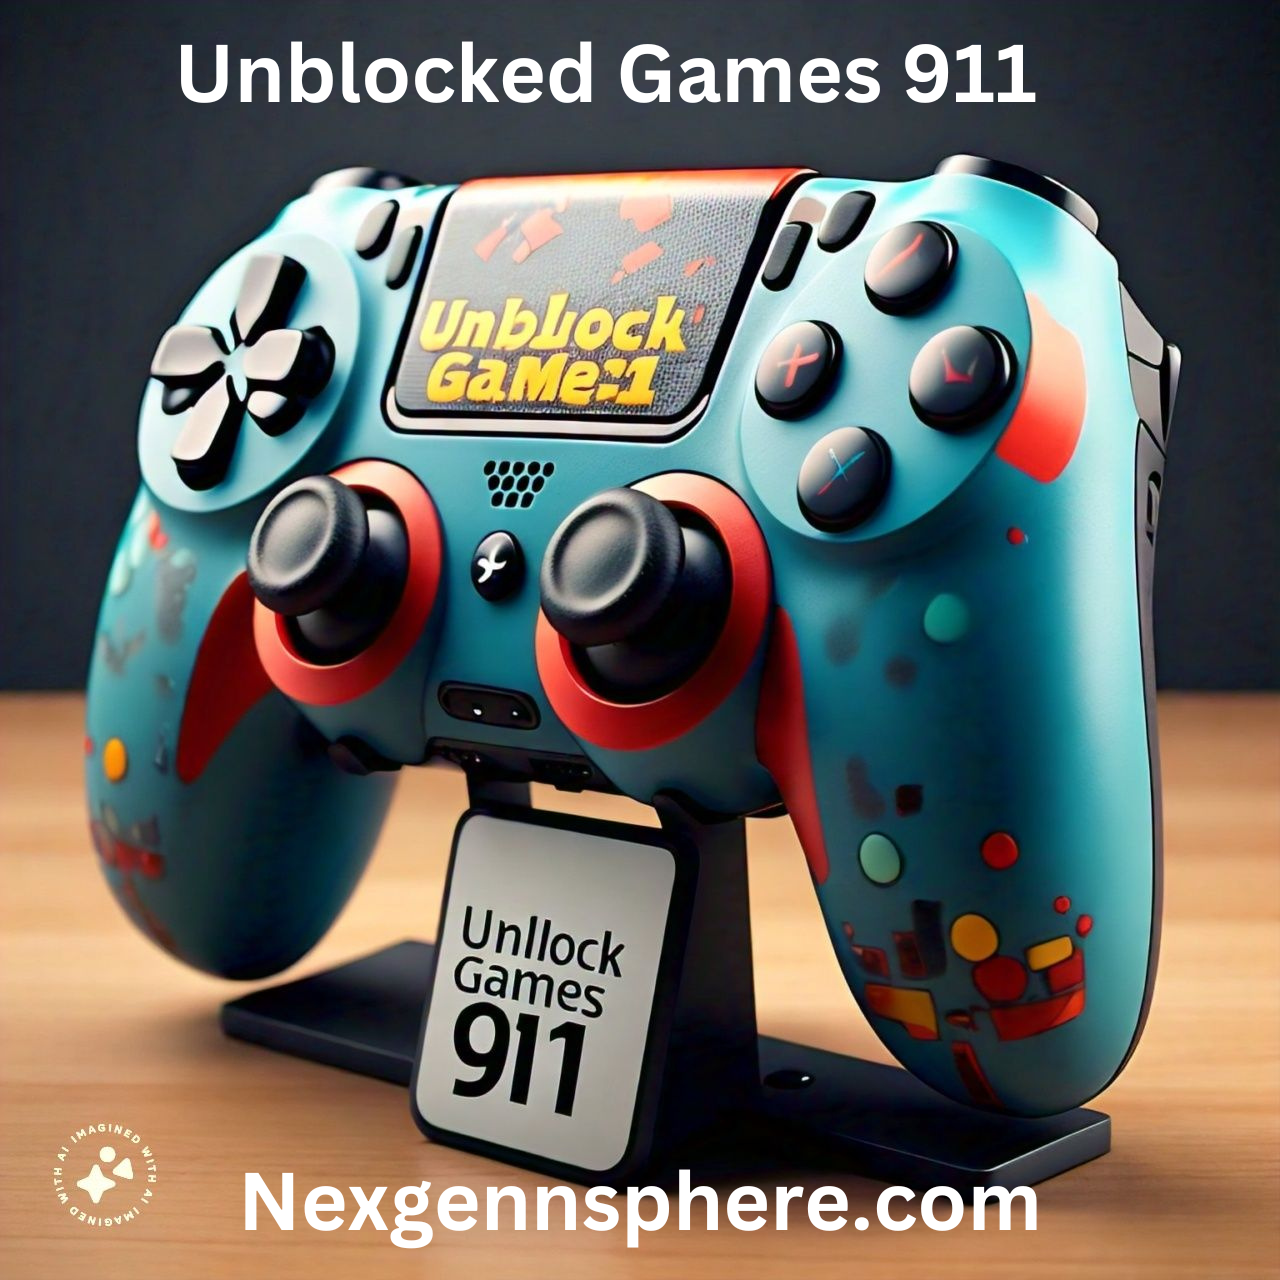 Unblocked Games 911: Your Ultimate Guide to Online Gaming Freedom